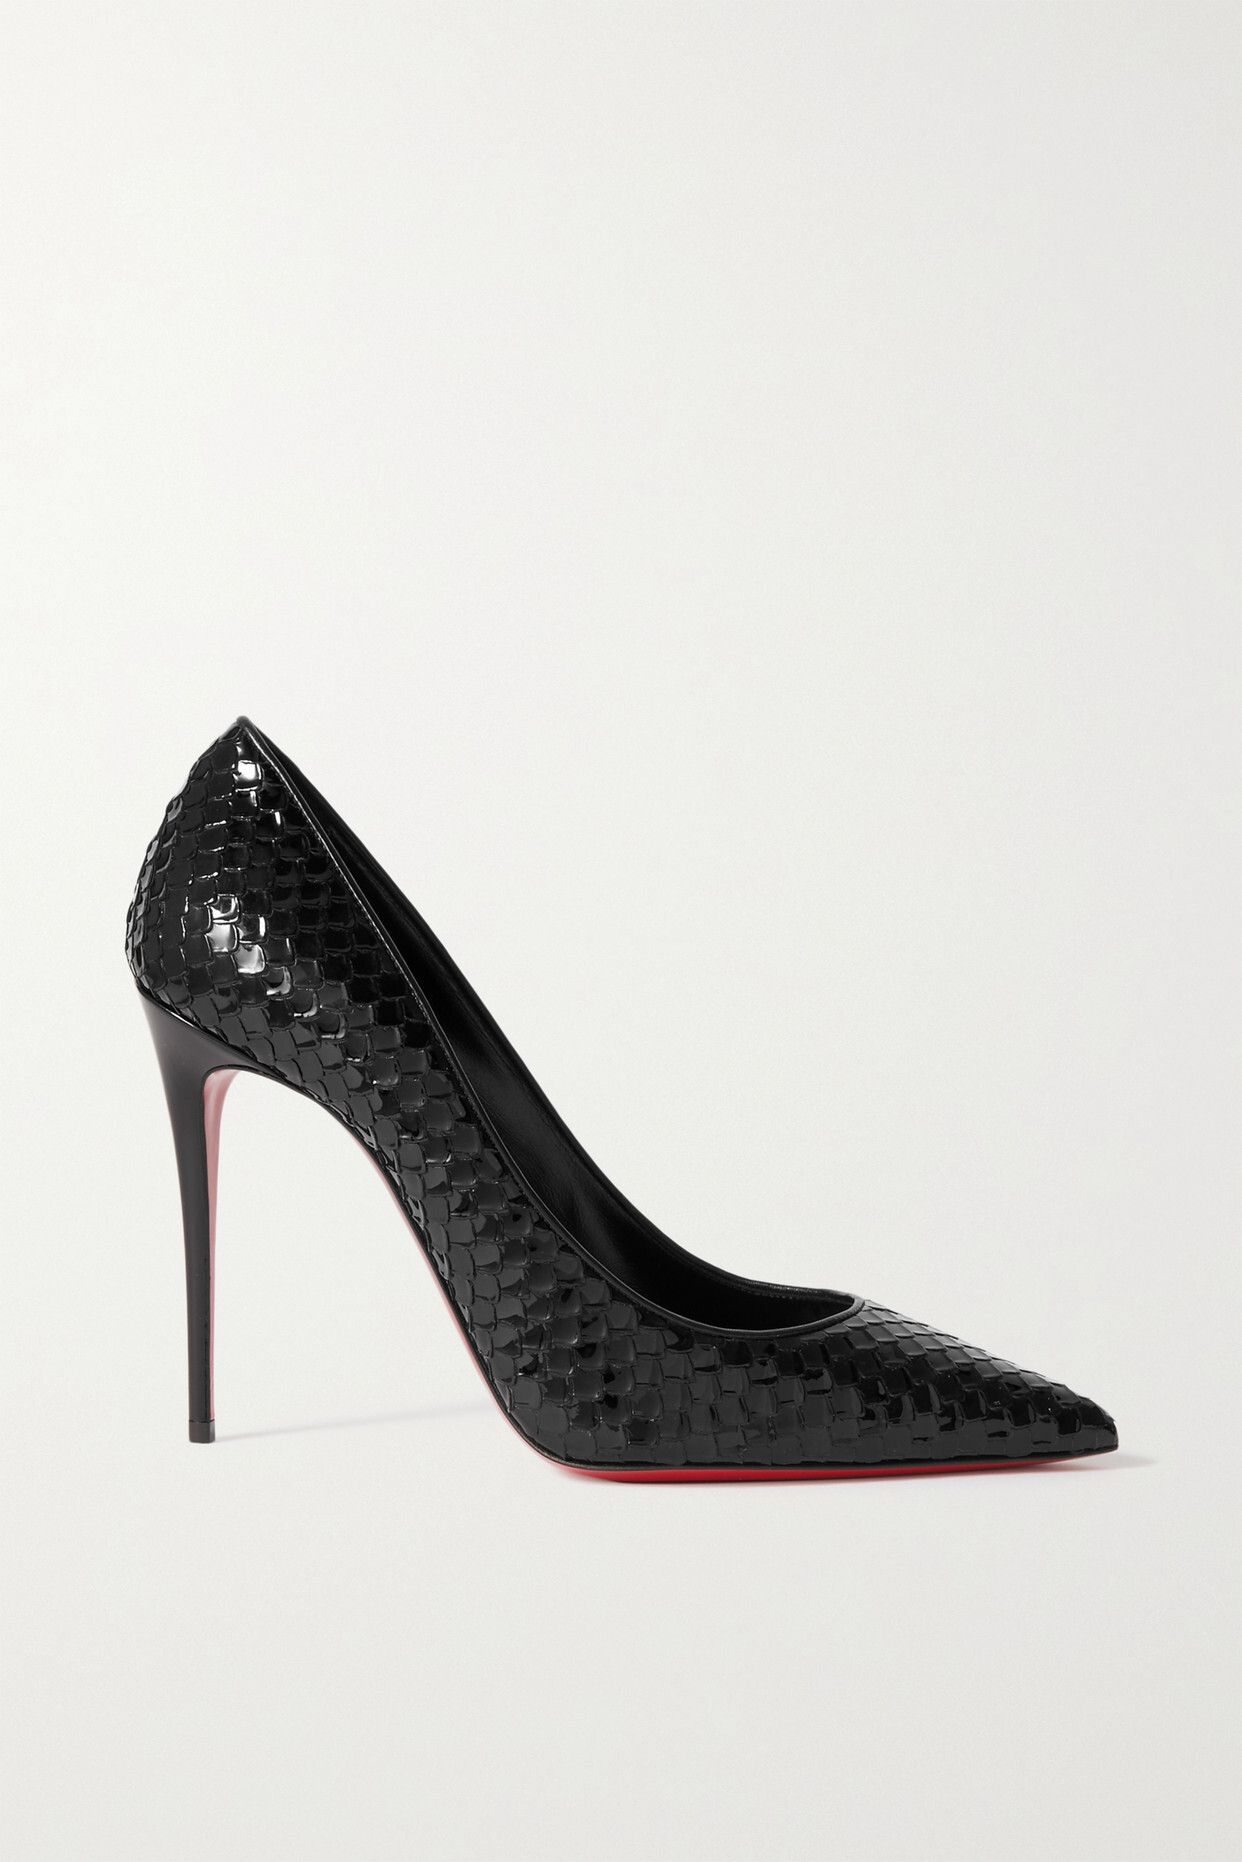 Christian Louboutin - Kate 100 Glossed Lizard-effect Leather Pumps - Black